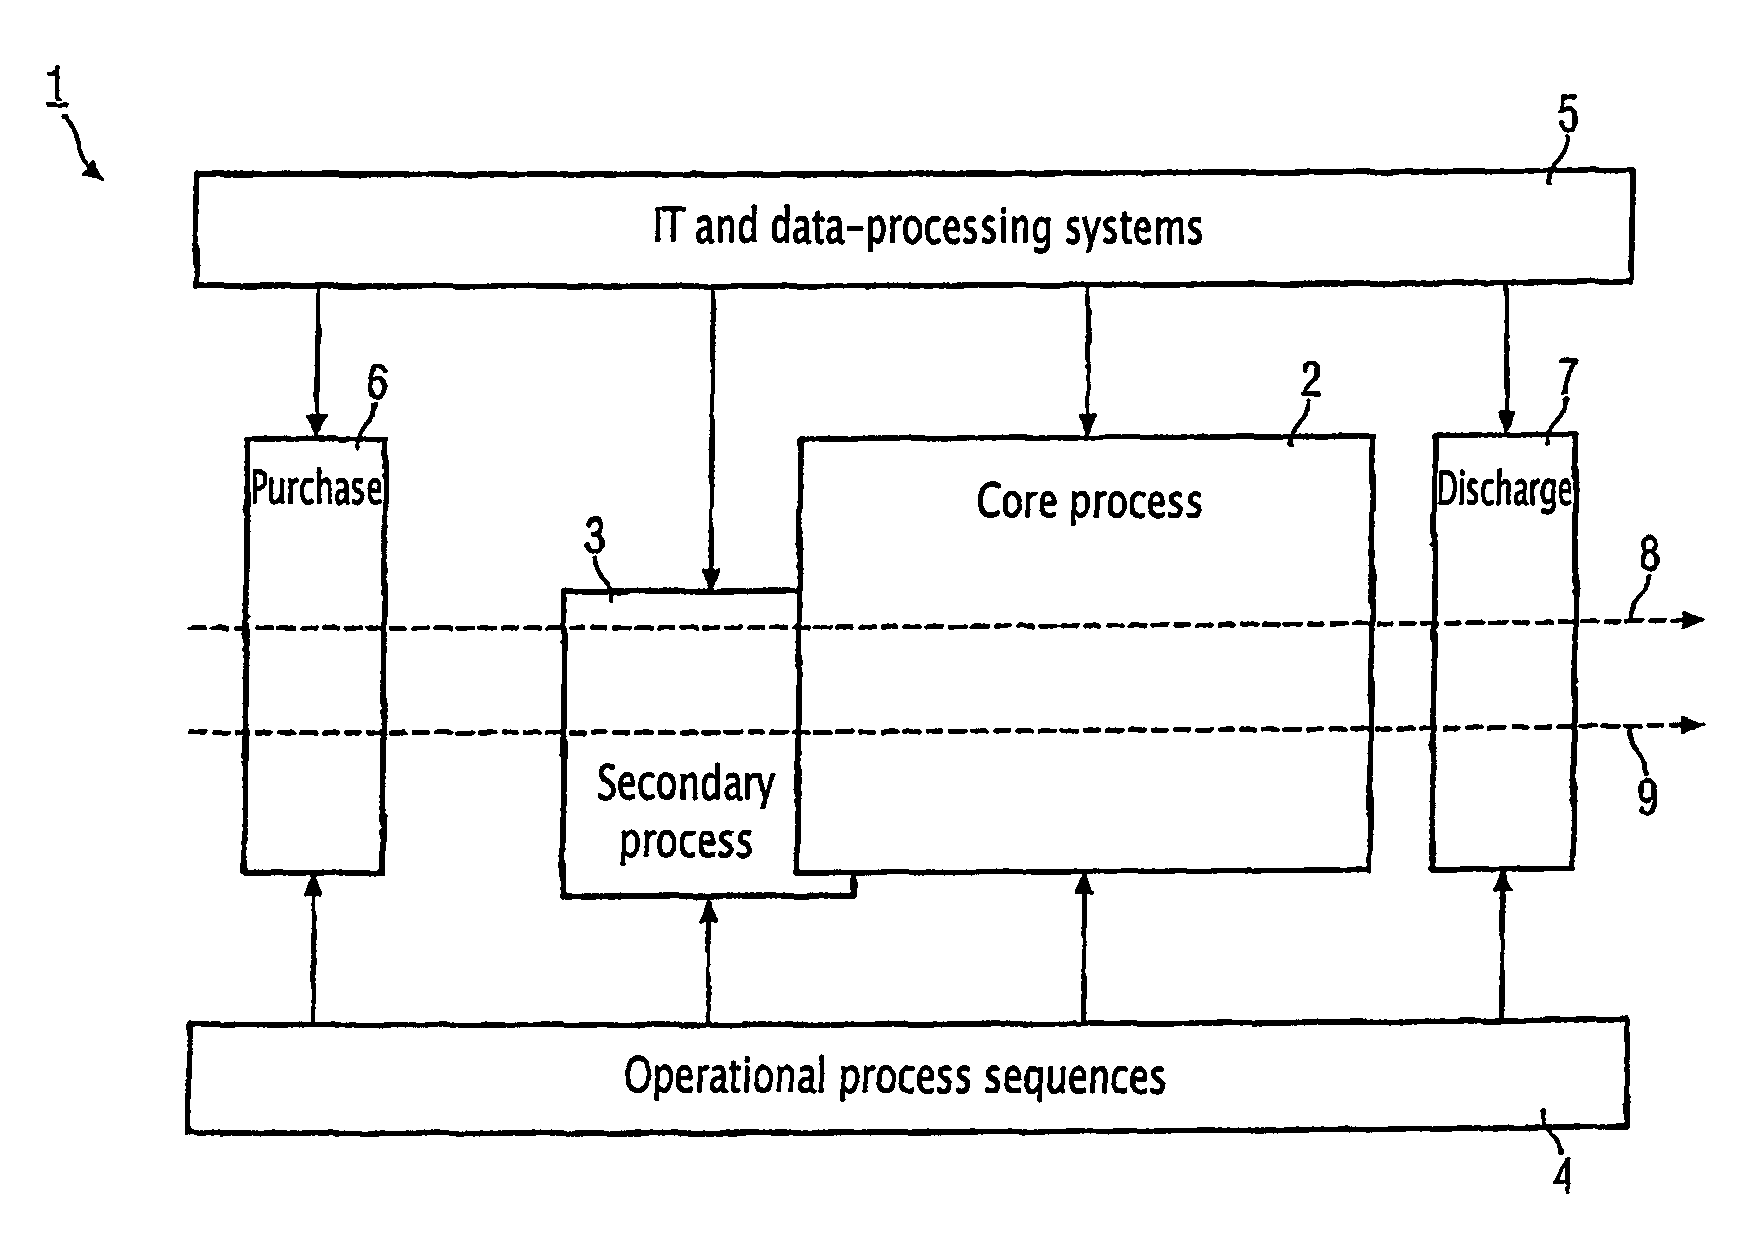 Method and system for reducing energy costs in an industrially operated facility